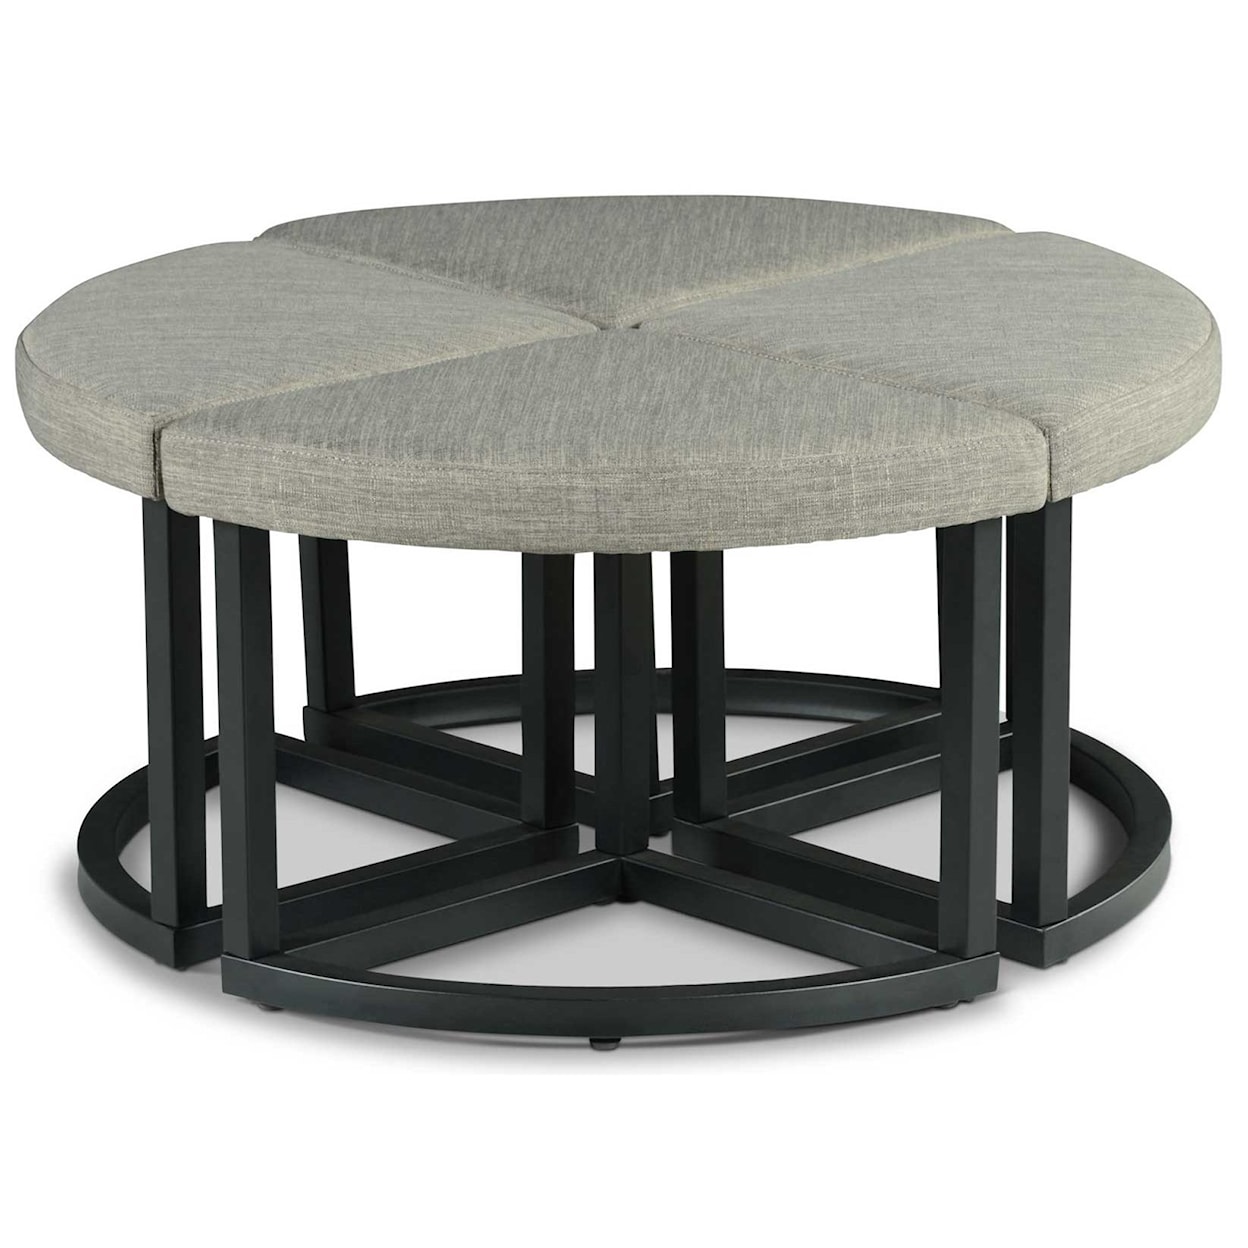 Steve Silver Yukon Coffee Table with Stools